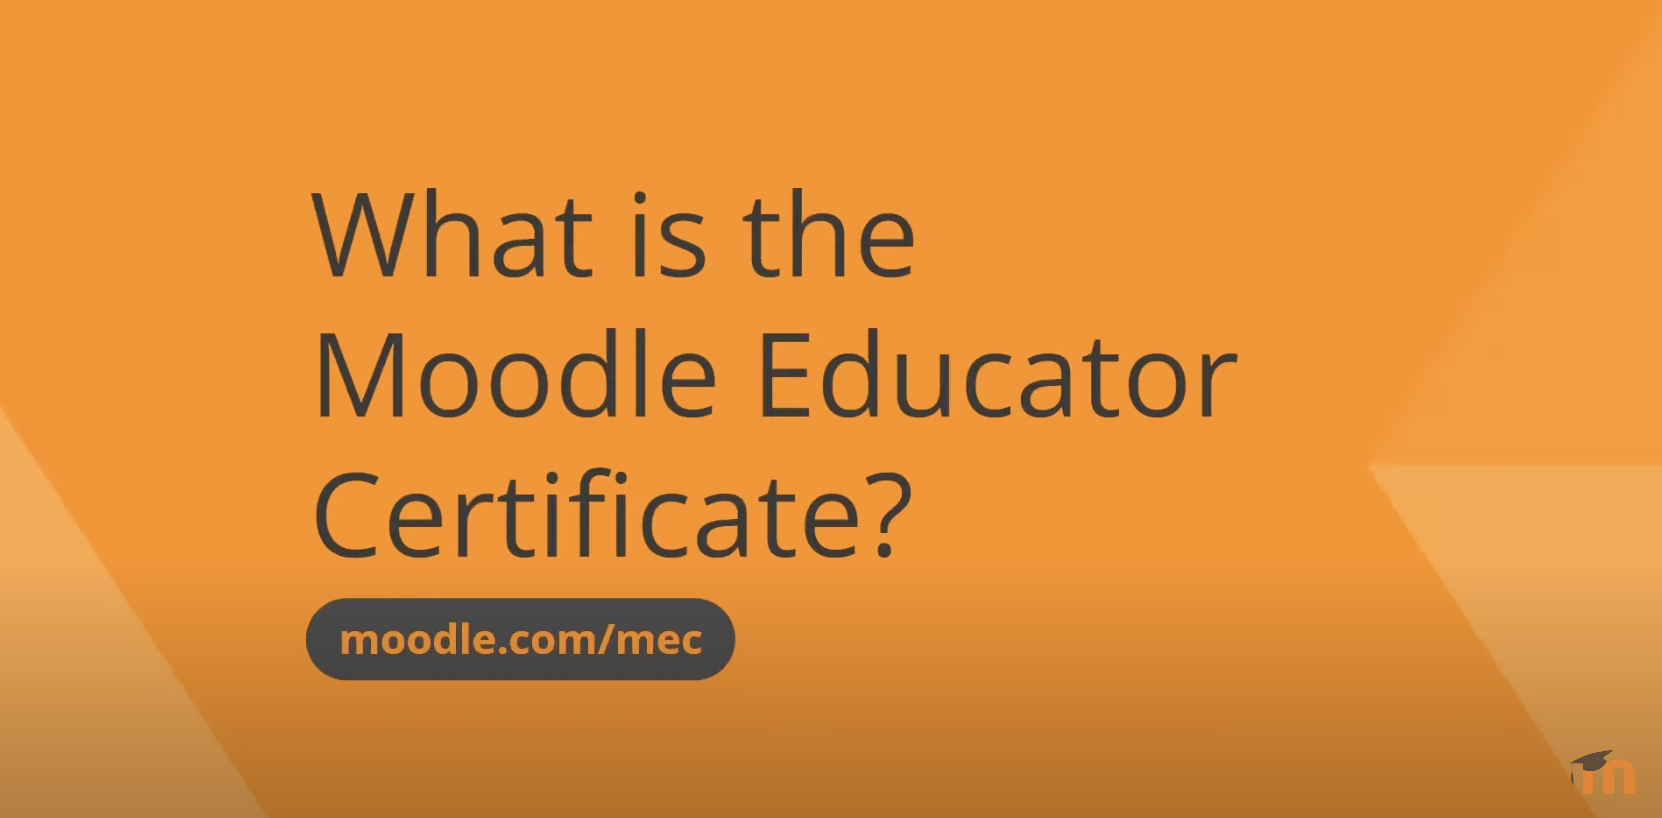 What is the Moodle Educator Certificate?